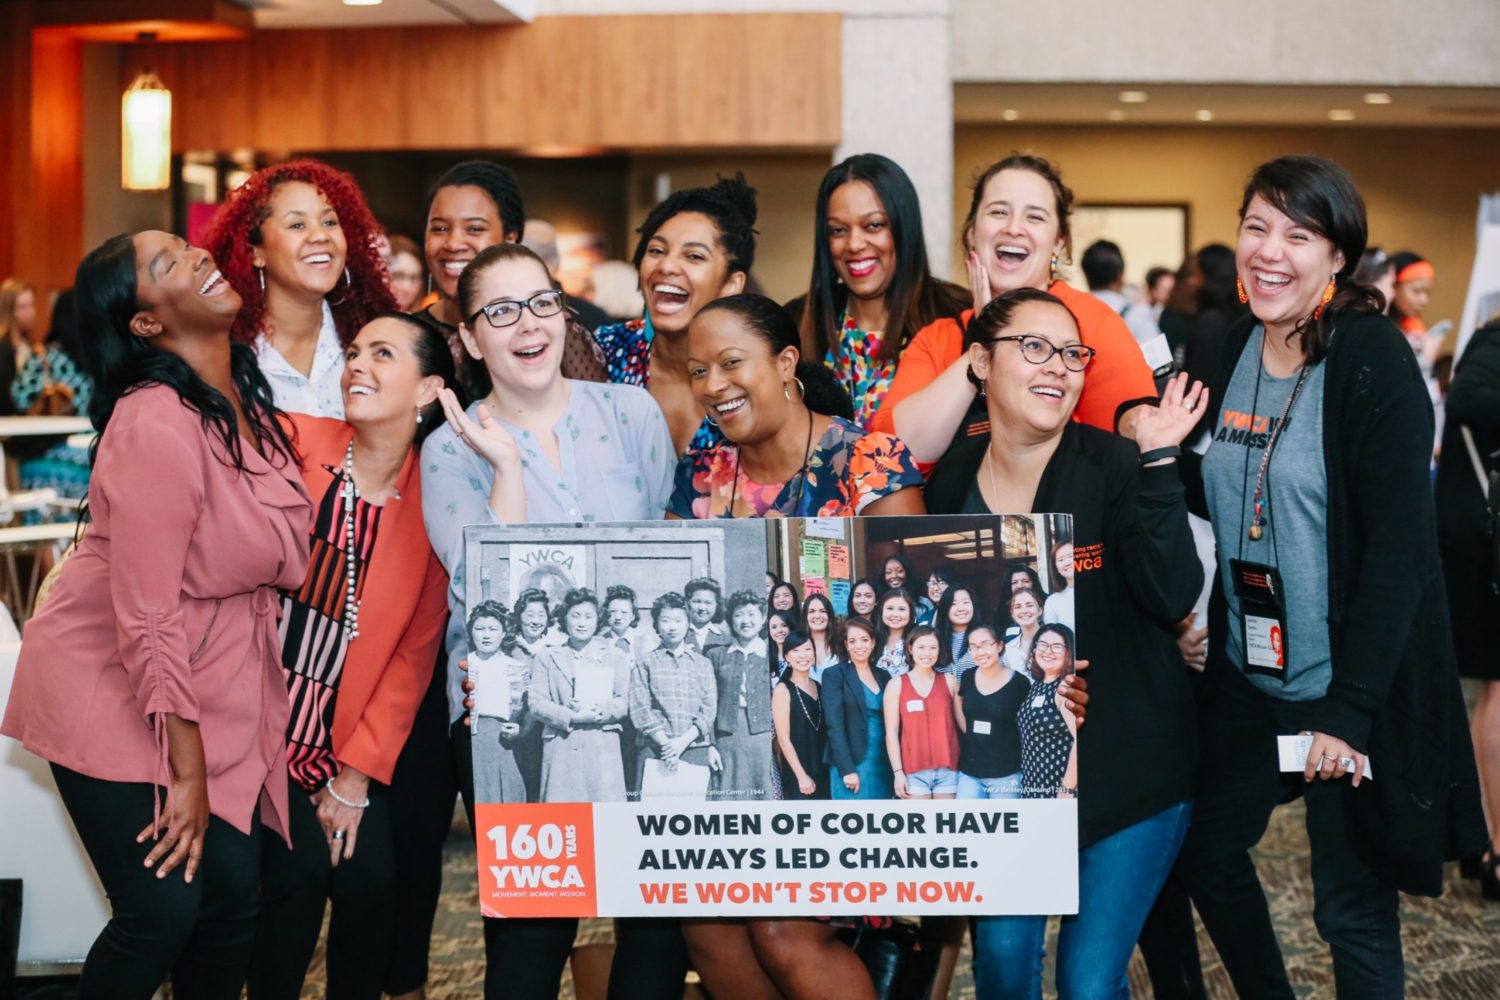 YWCA’s Key to Success? Invest in Women